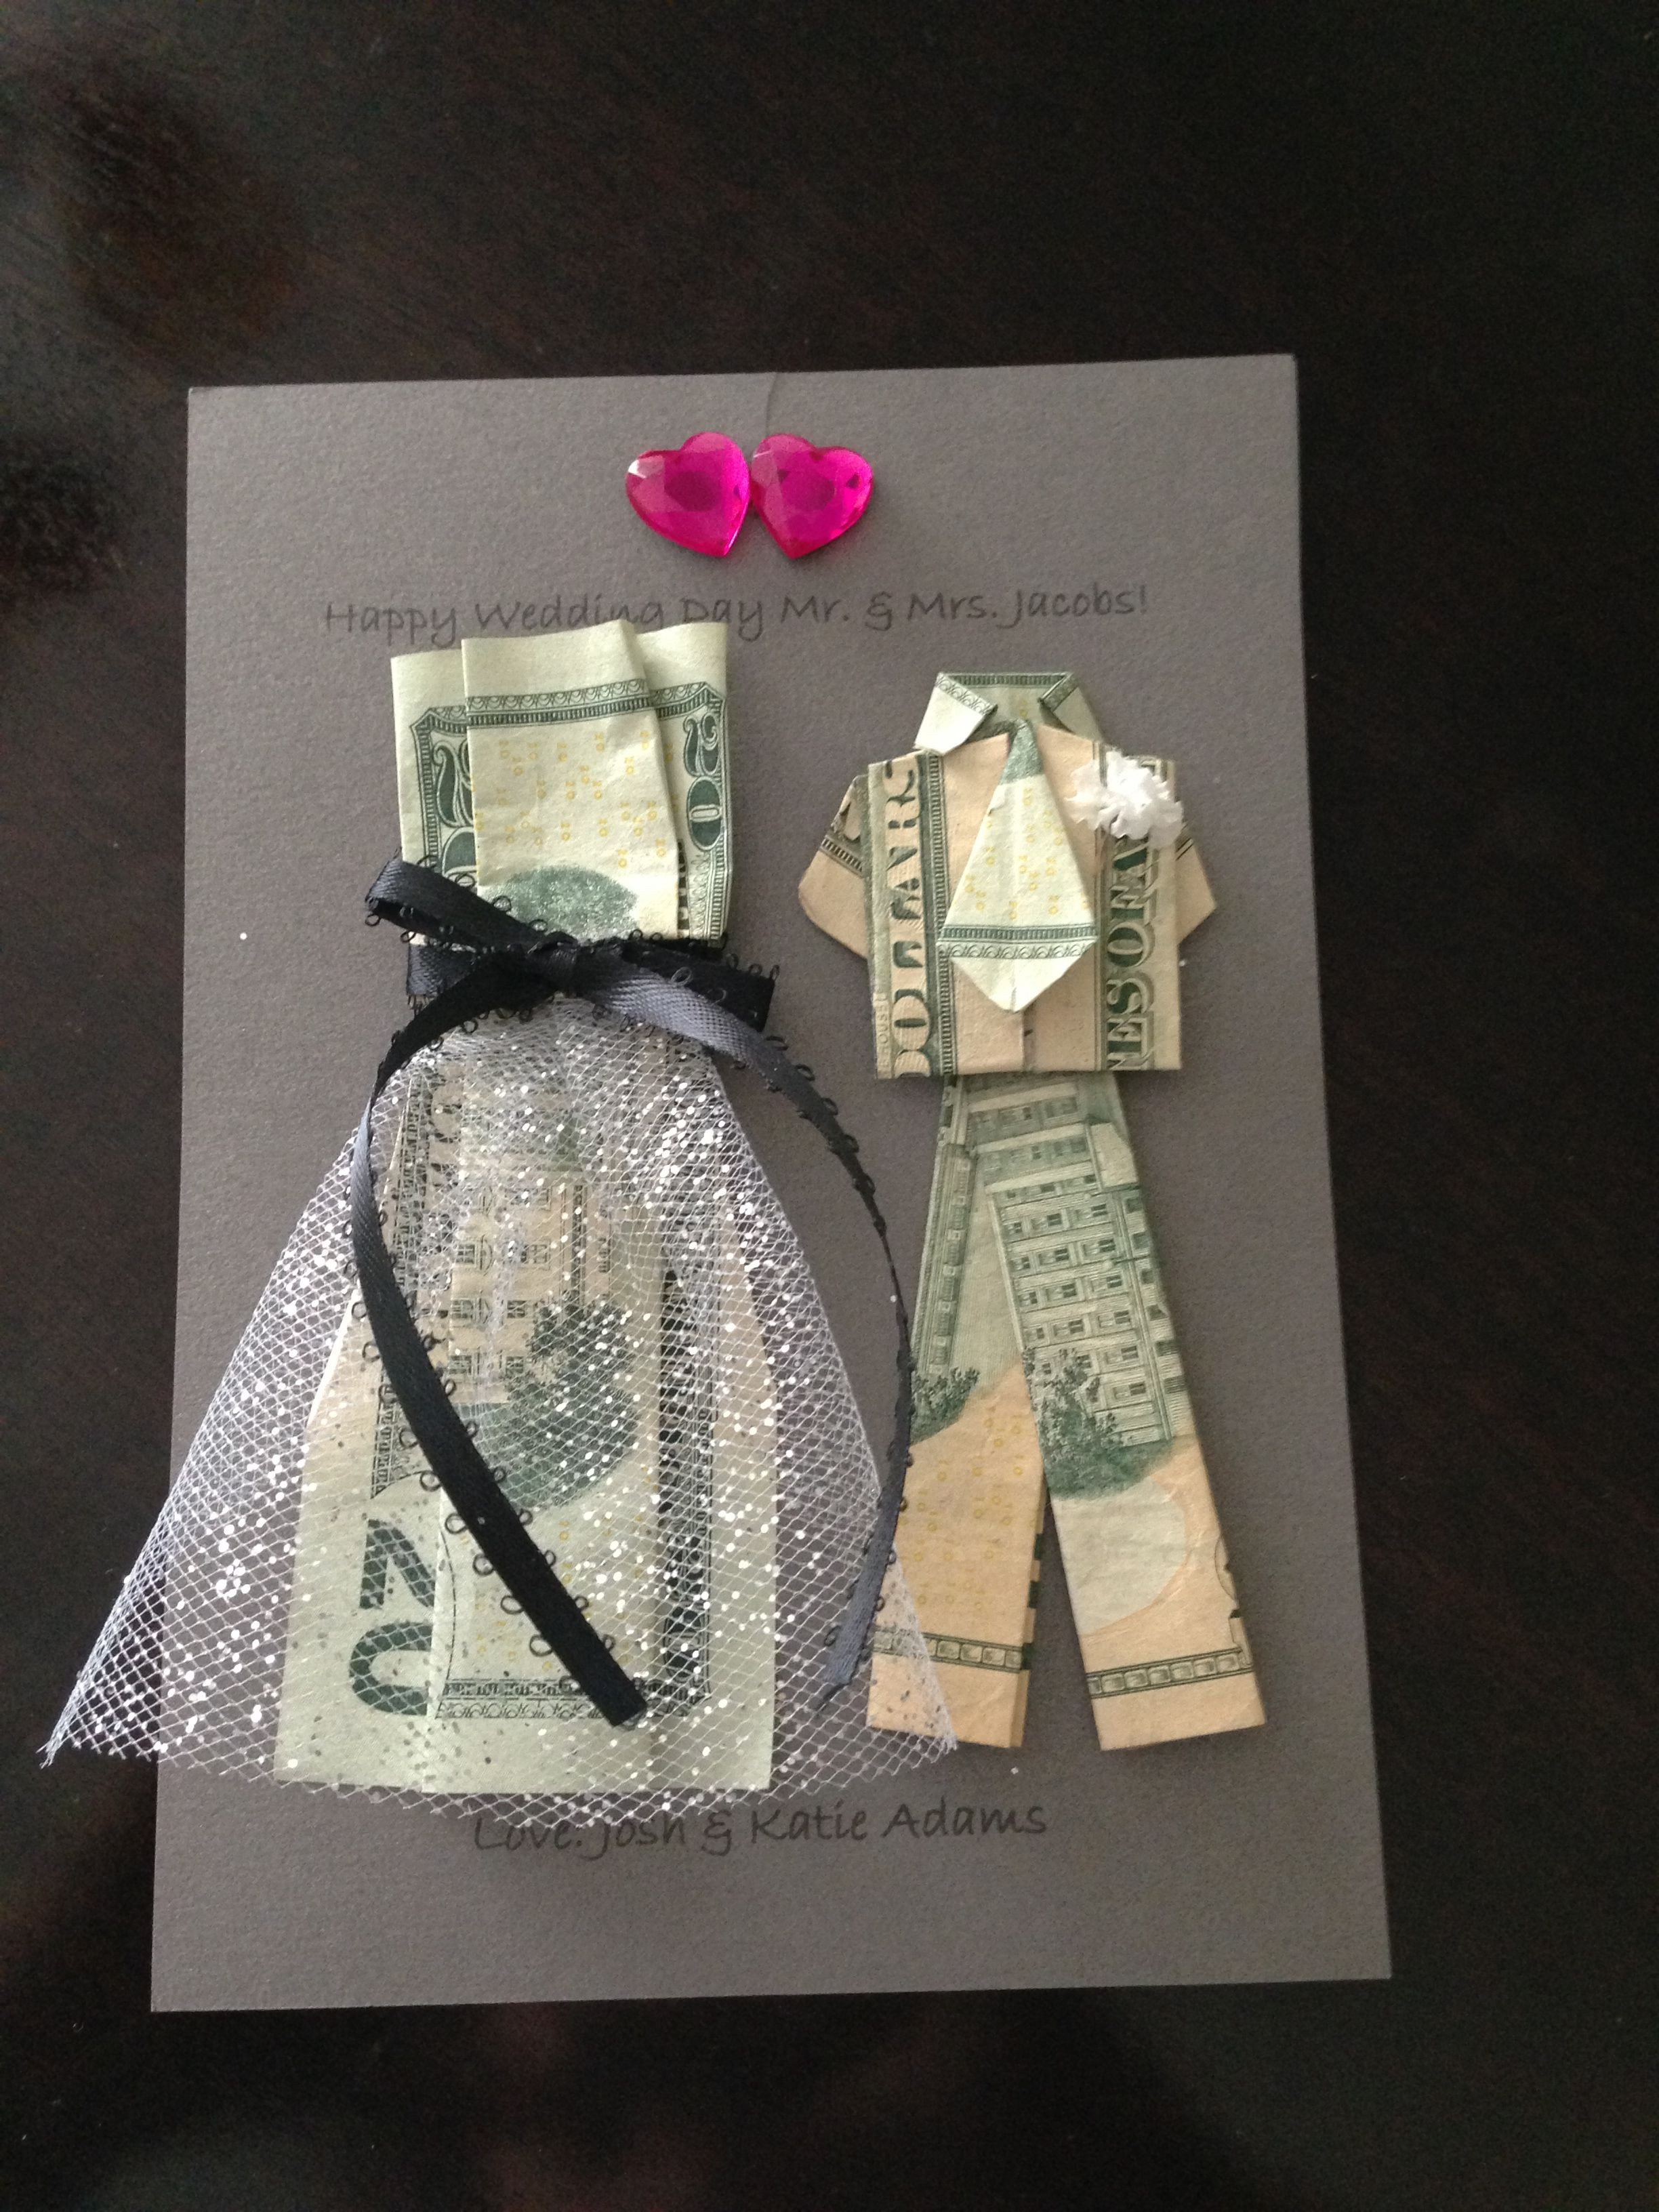 Gift Ideas For A Wedding
 Wedding Money Gifts on Pinterest